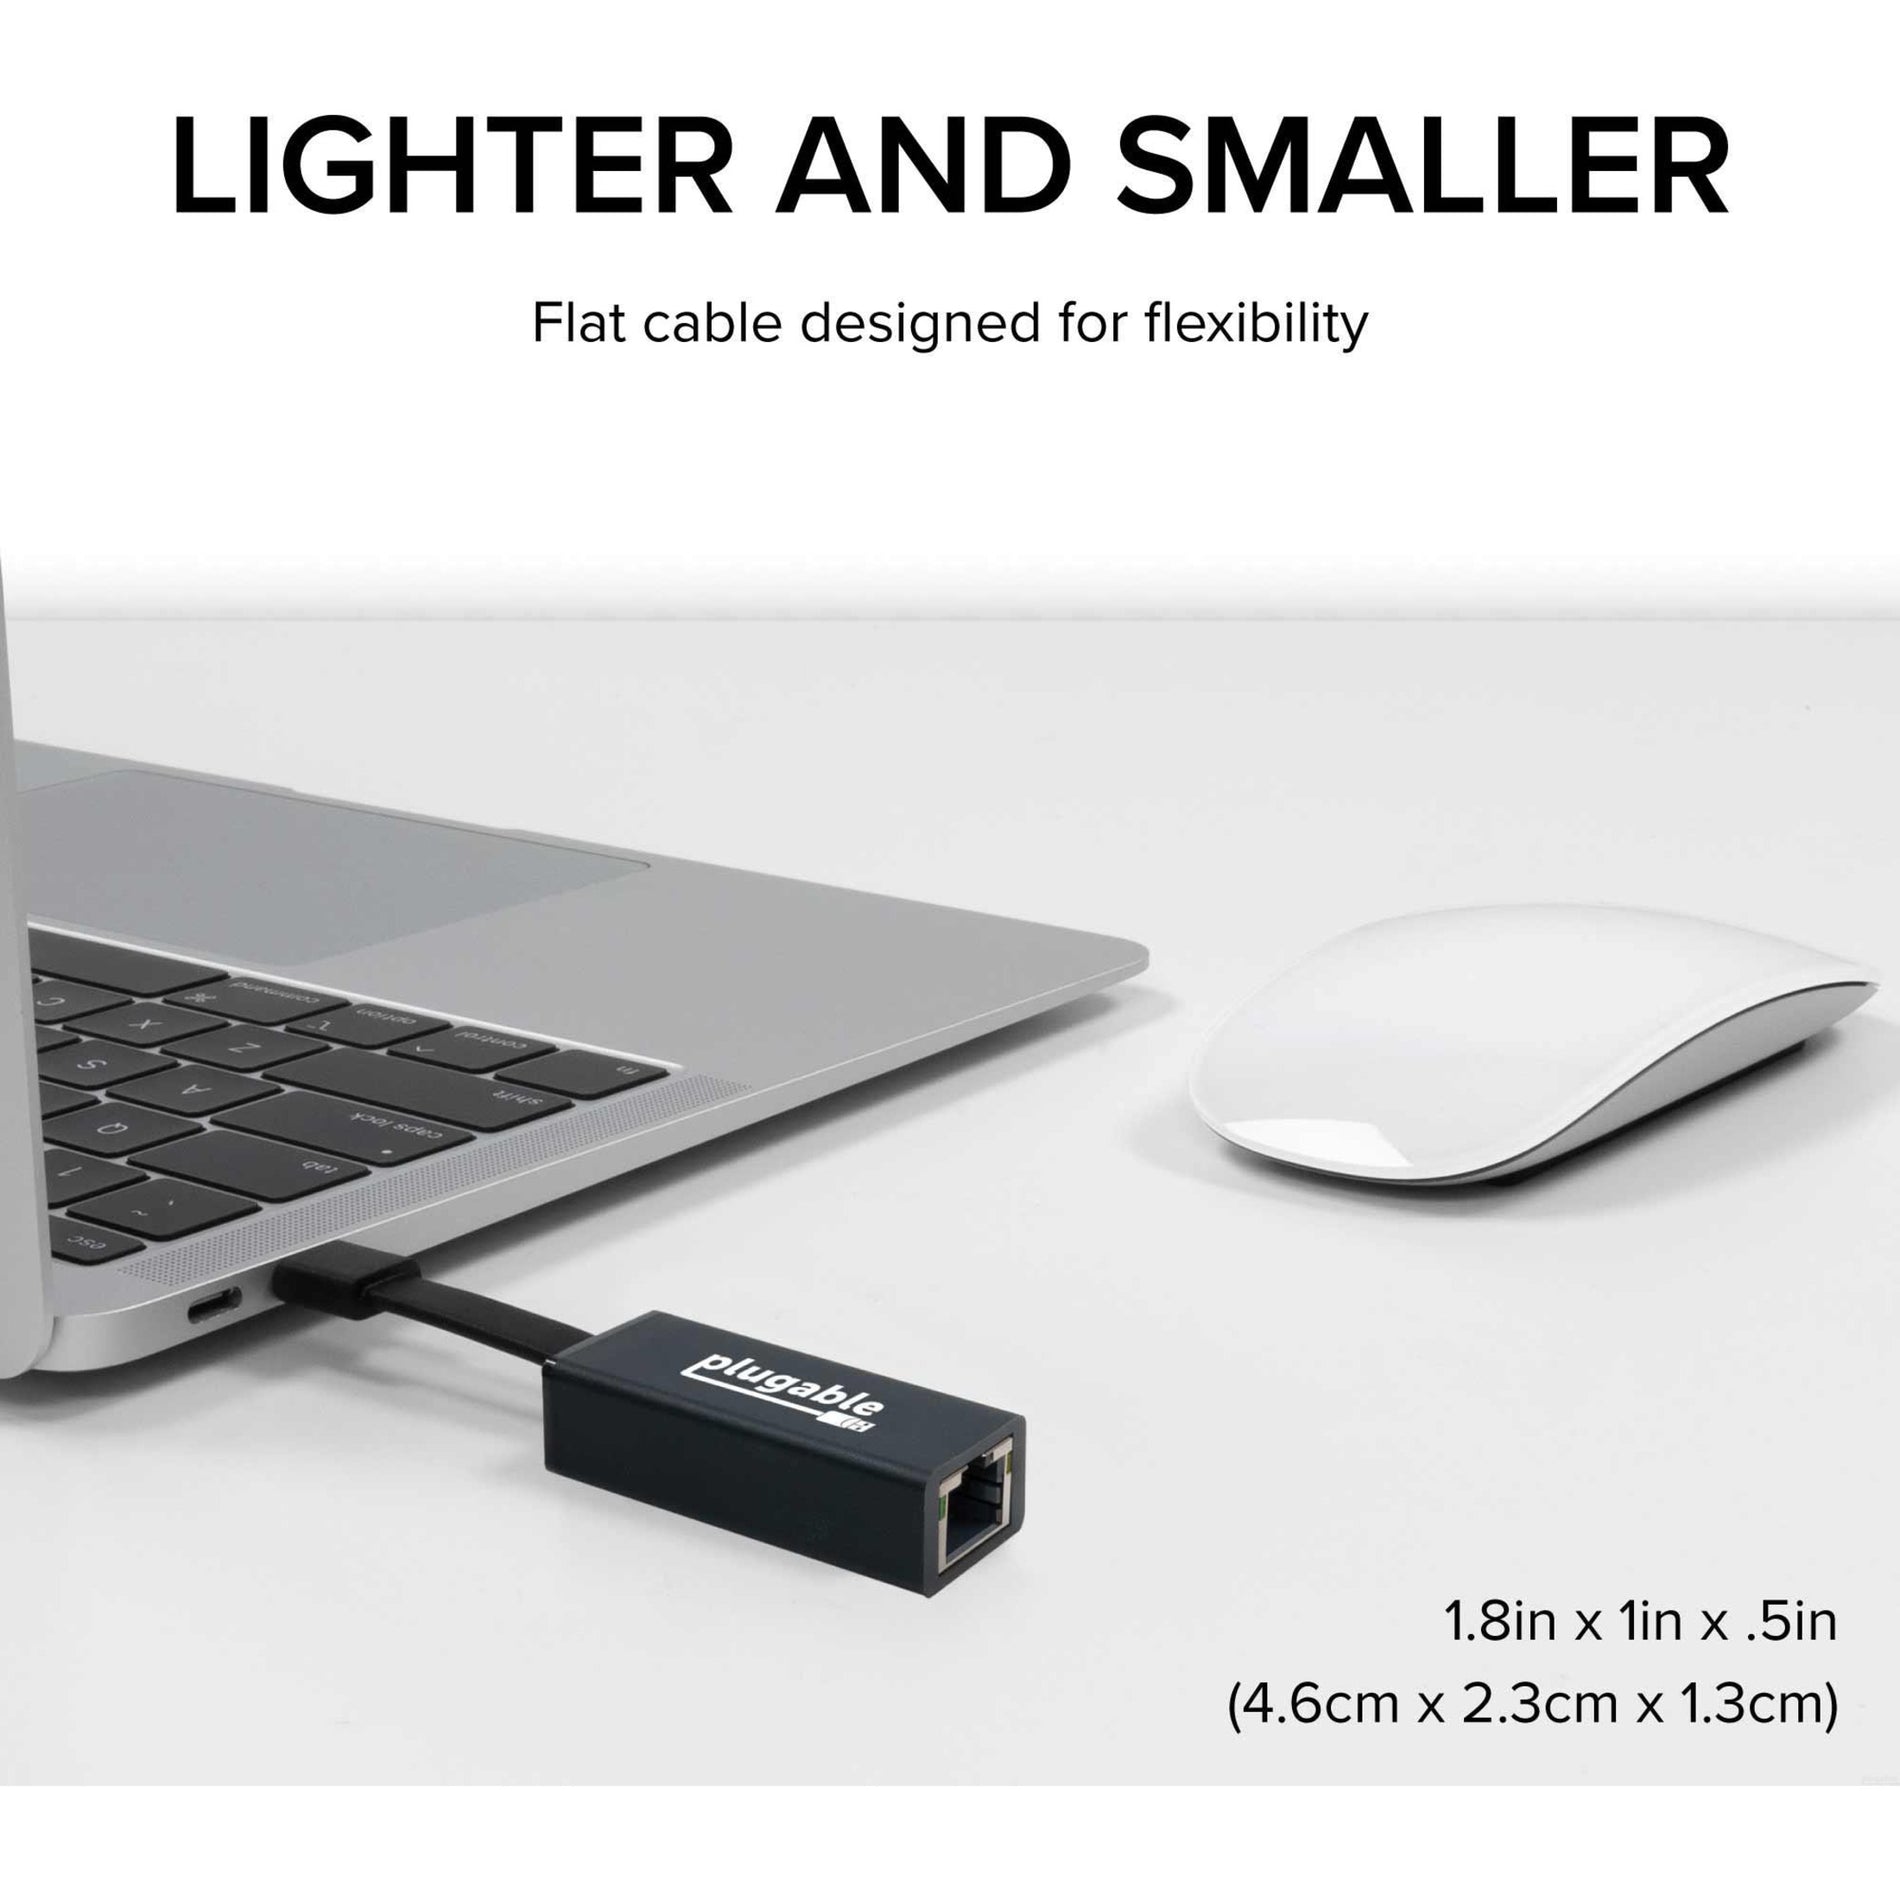 Plugable USBC-TE1000 USB-C To Gigabit Ethernet Adapter, Fast and Reliable Gigabit Speed